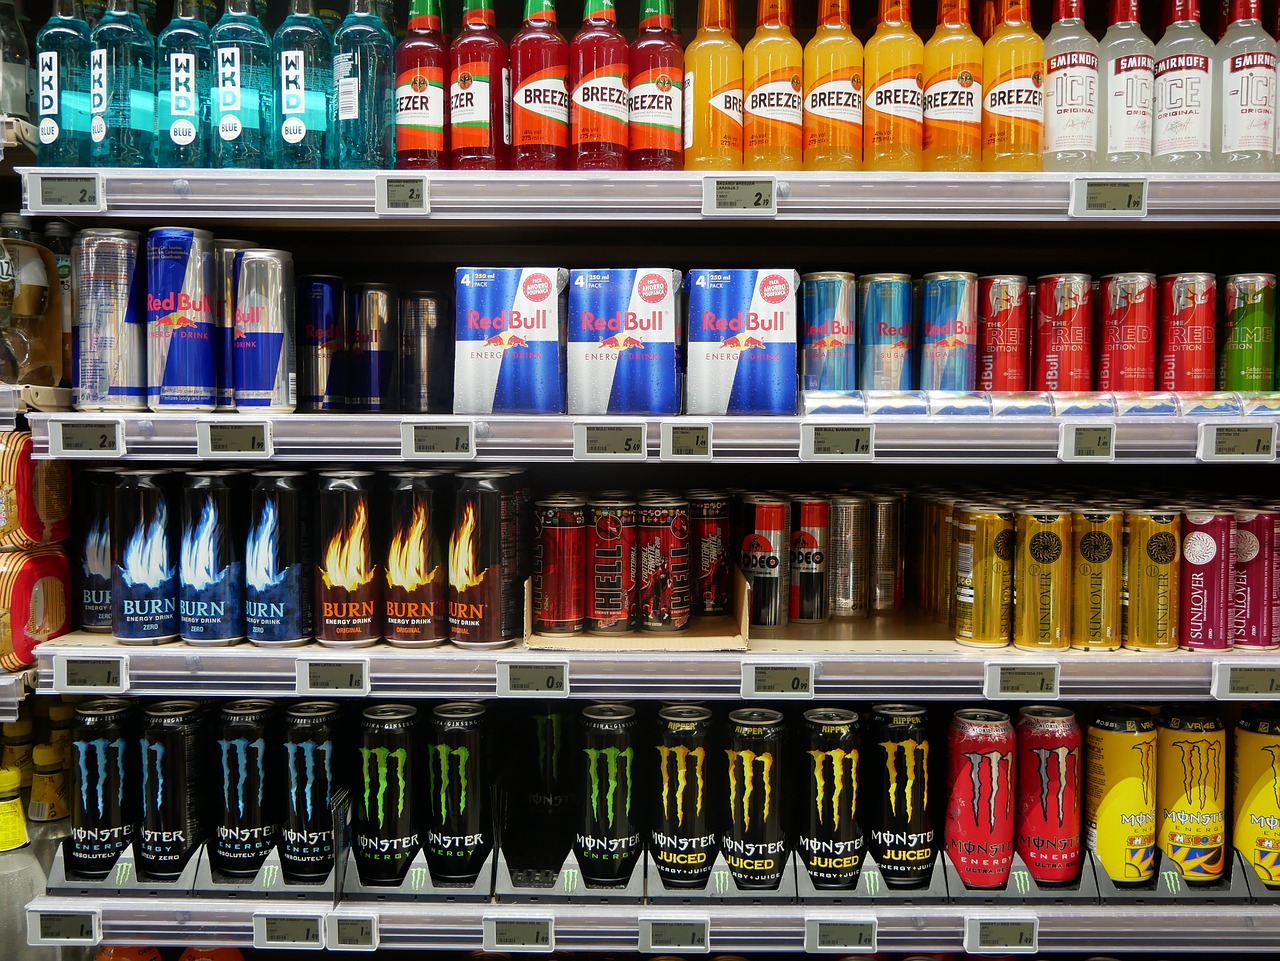 Energy Drinks: Smart Advertising, but are they safe?